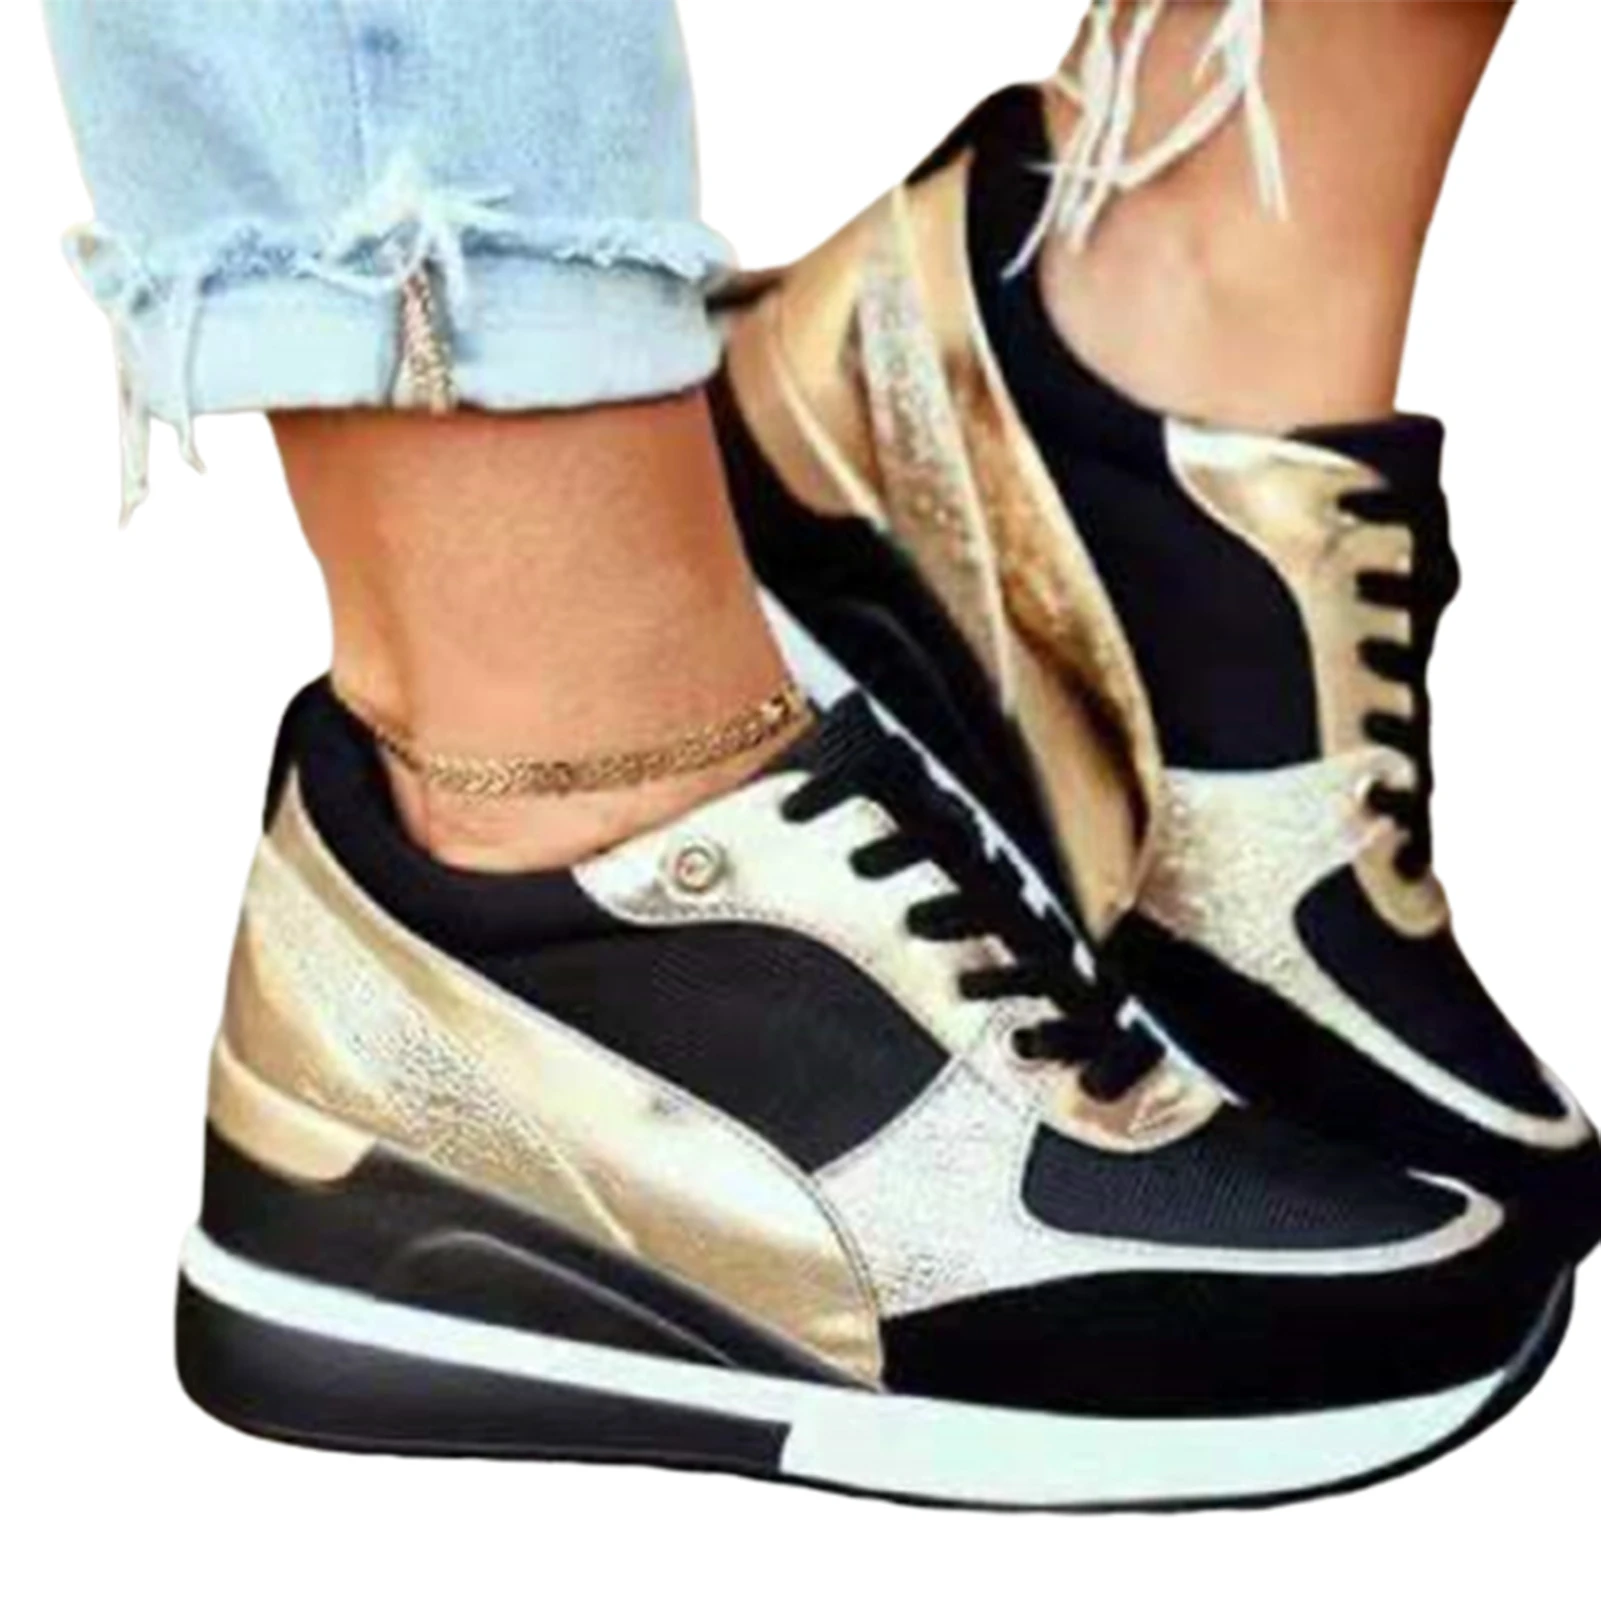 Newly Basket Eva Glow High Heeld Wedge Sneakers for Women Platform Casual  Lace Up Shoes for Daily Wear|Beach & Outdoor Sandals| - AliExpress